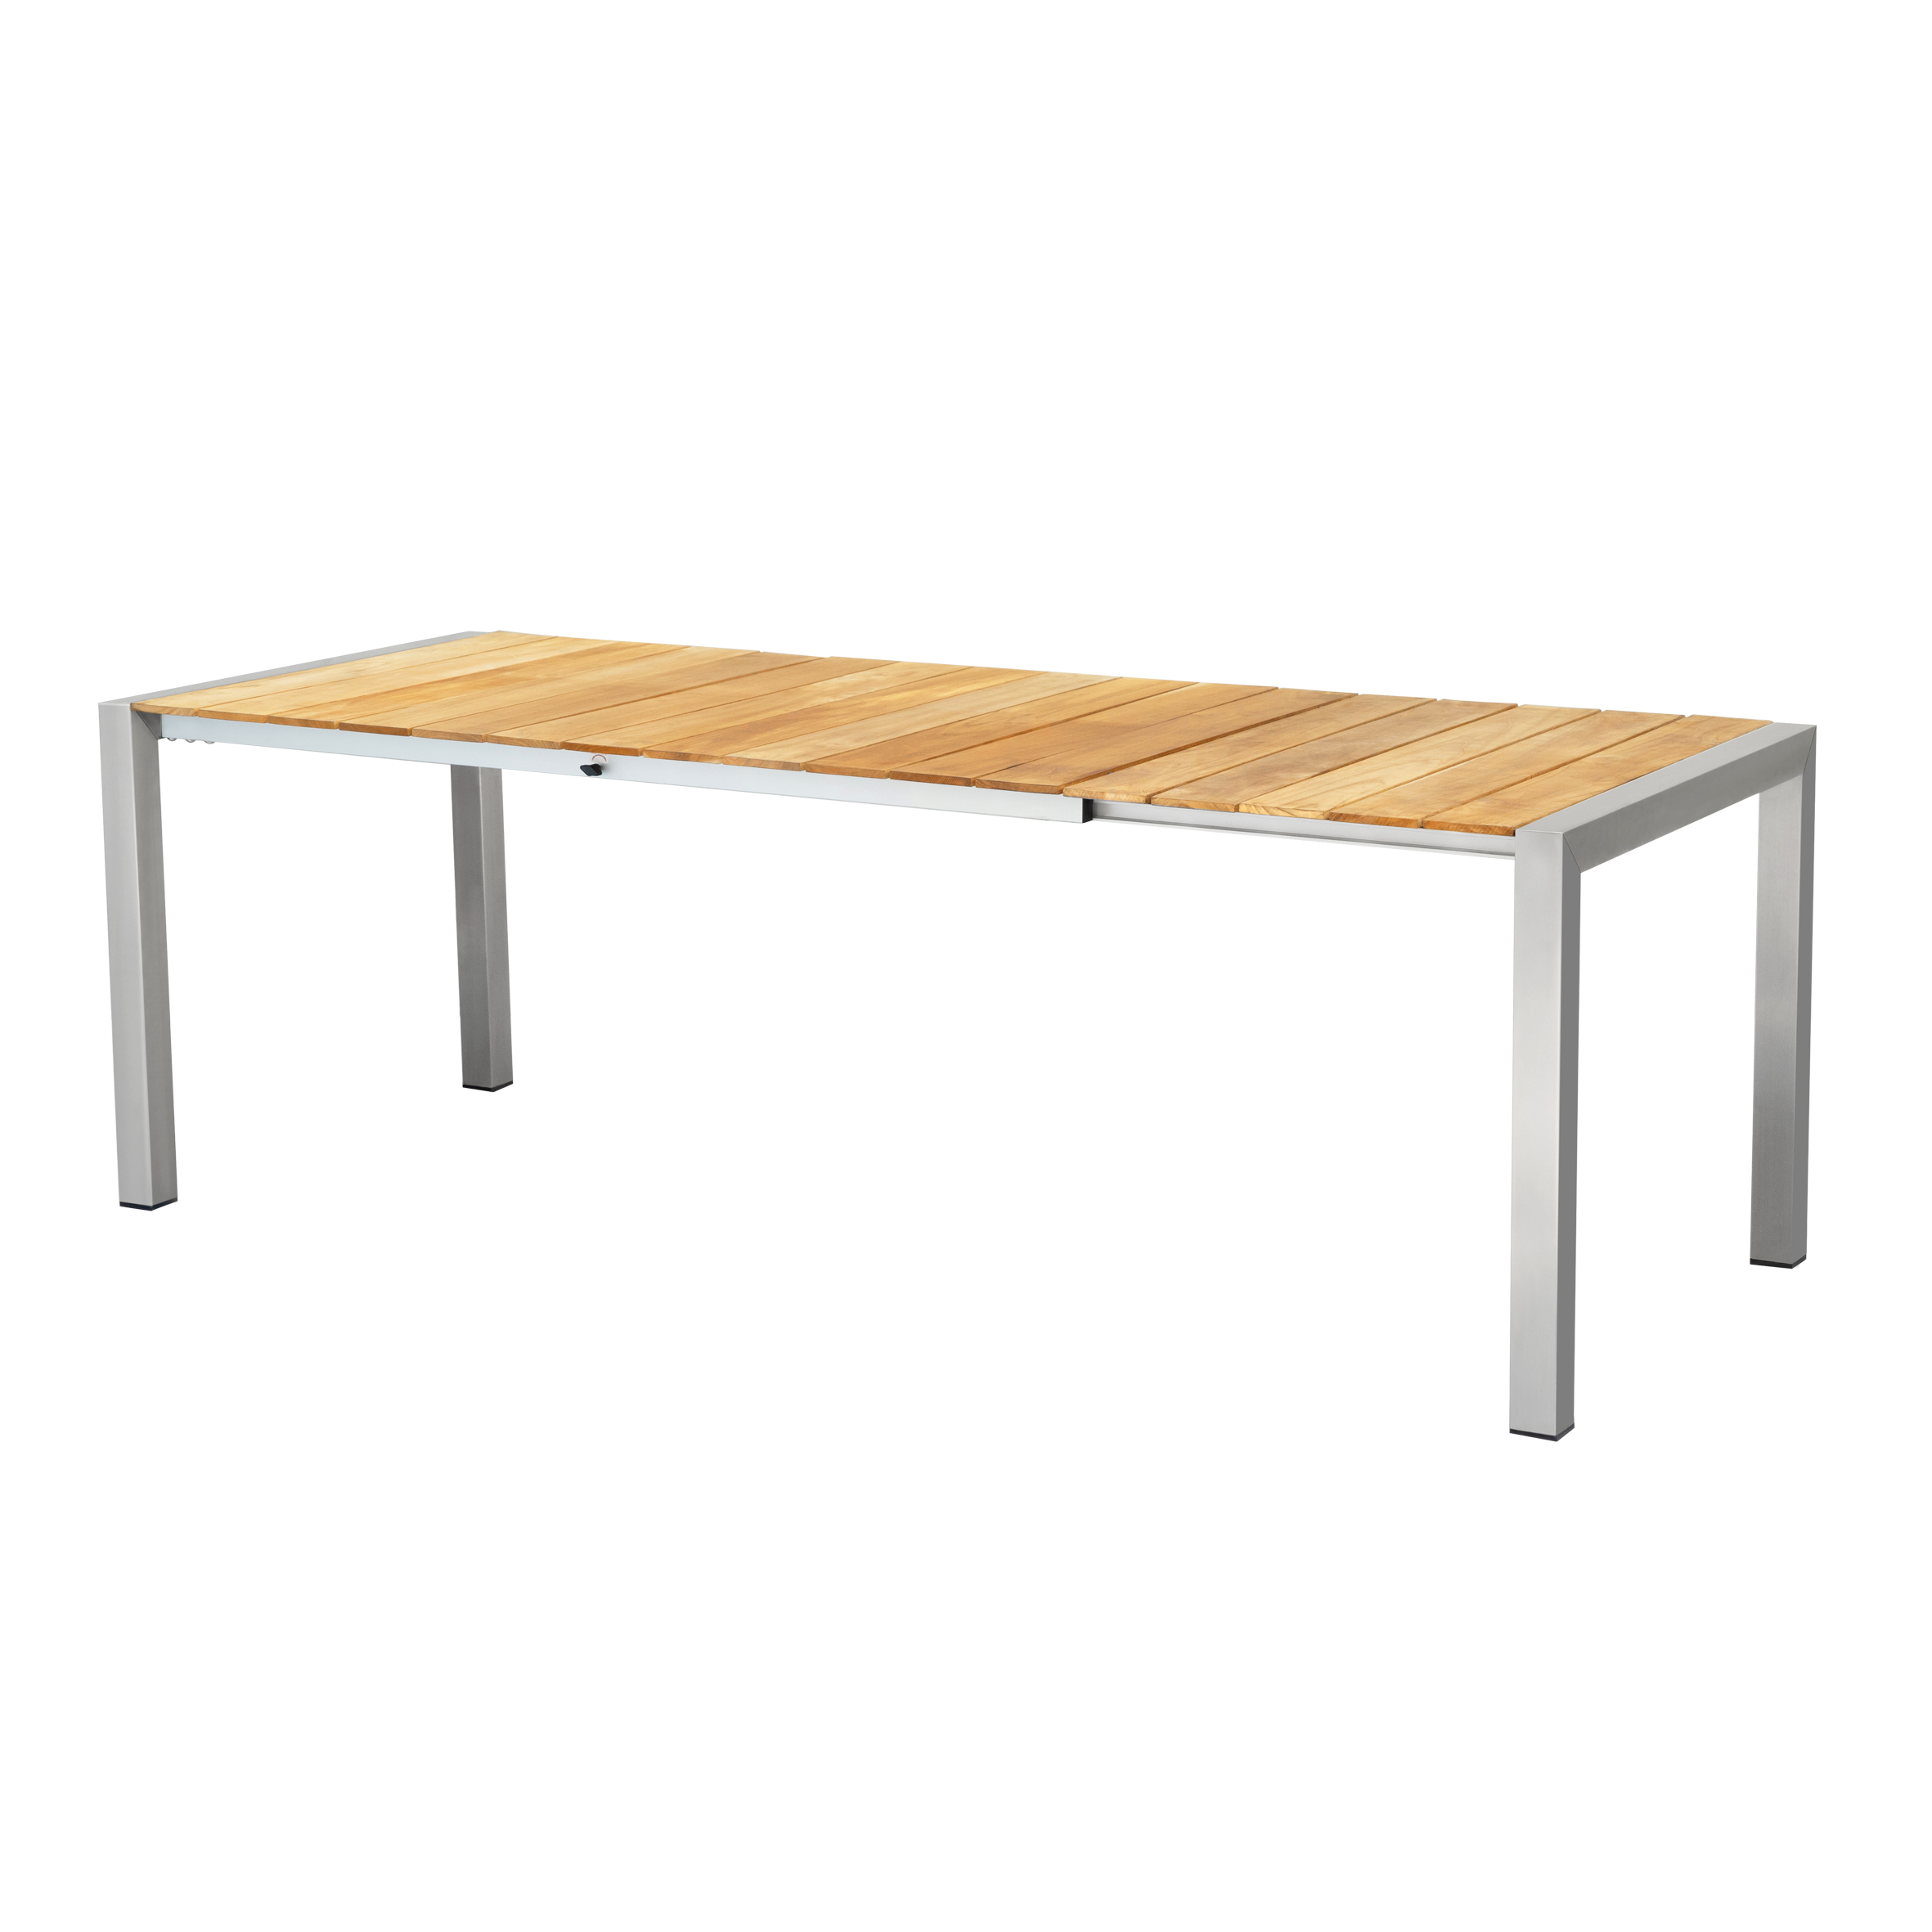 Alps manual extension table (Teak top) Featured Image